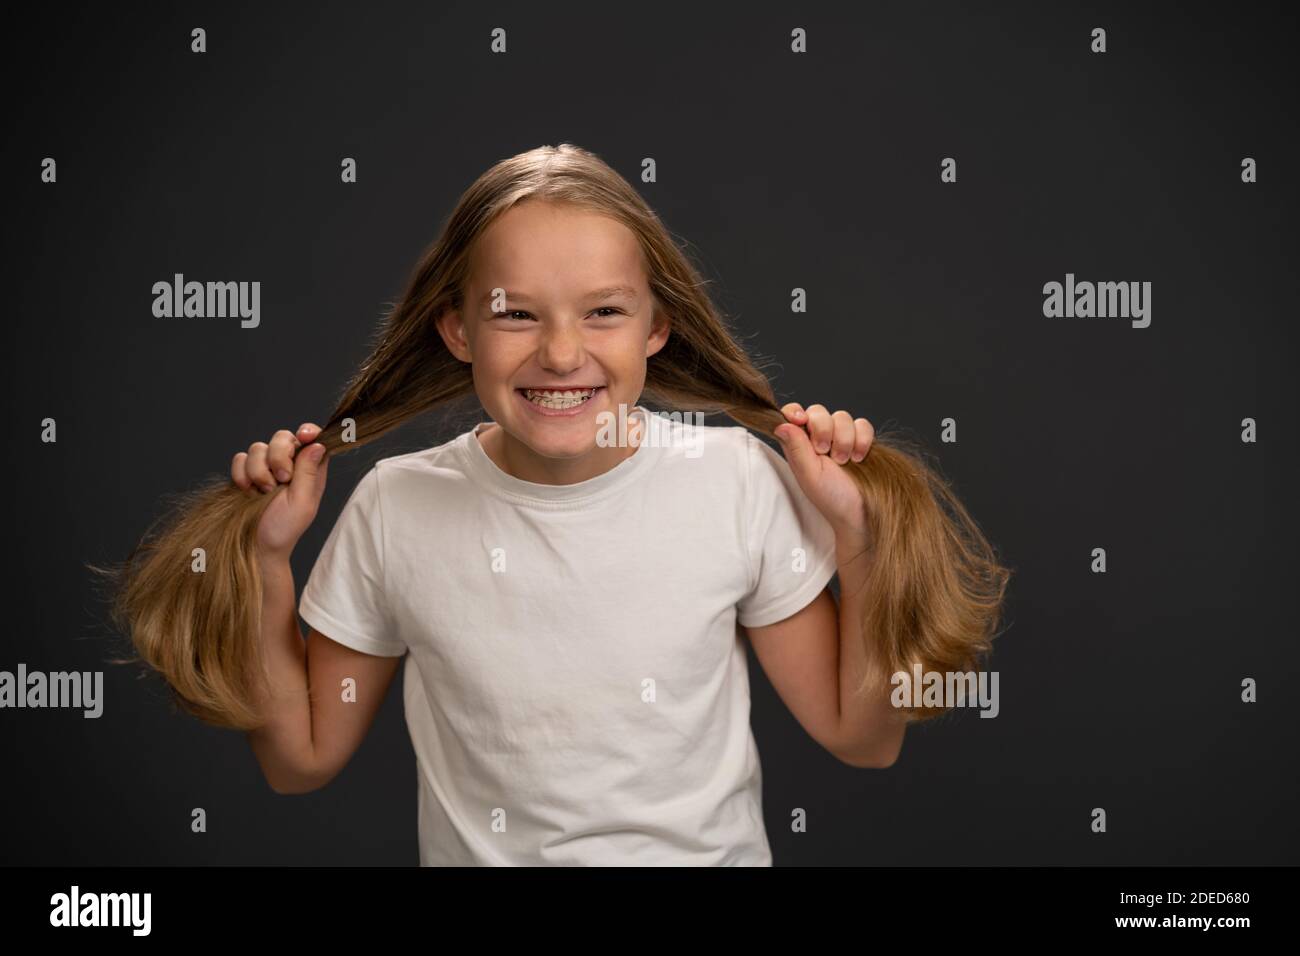 Happy smiling and holding two pony tails 8,10 years old girl holding her hair wearing white t shirt smiling a little grinning at the camera isolated Stock Photo